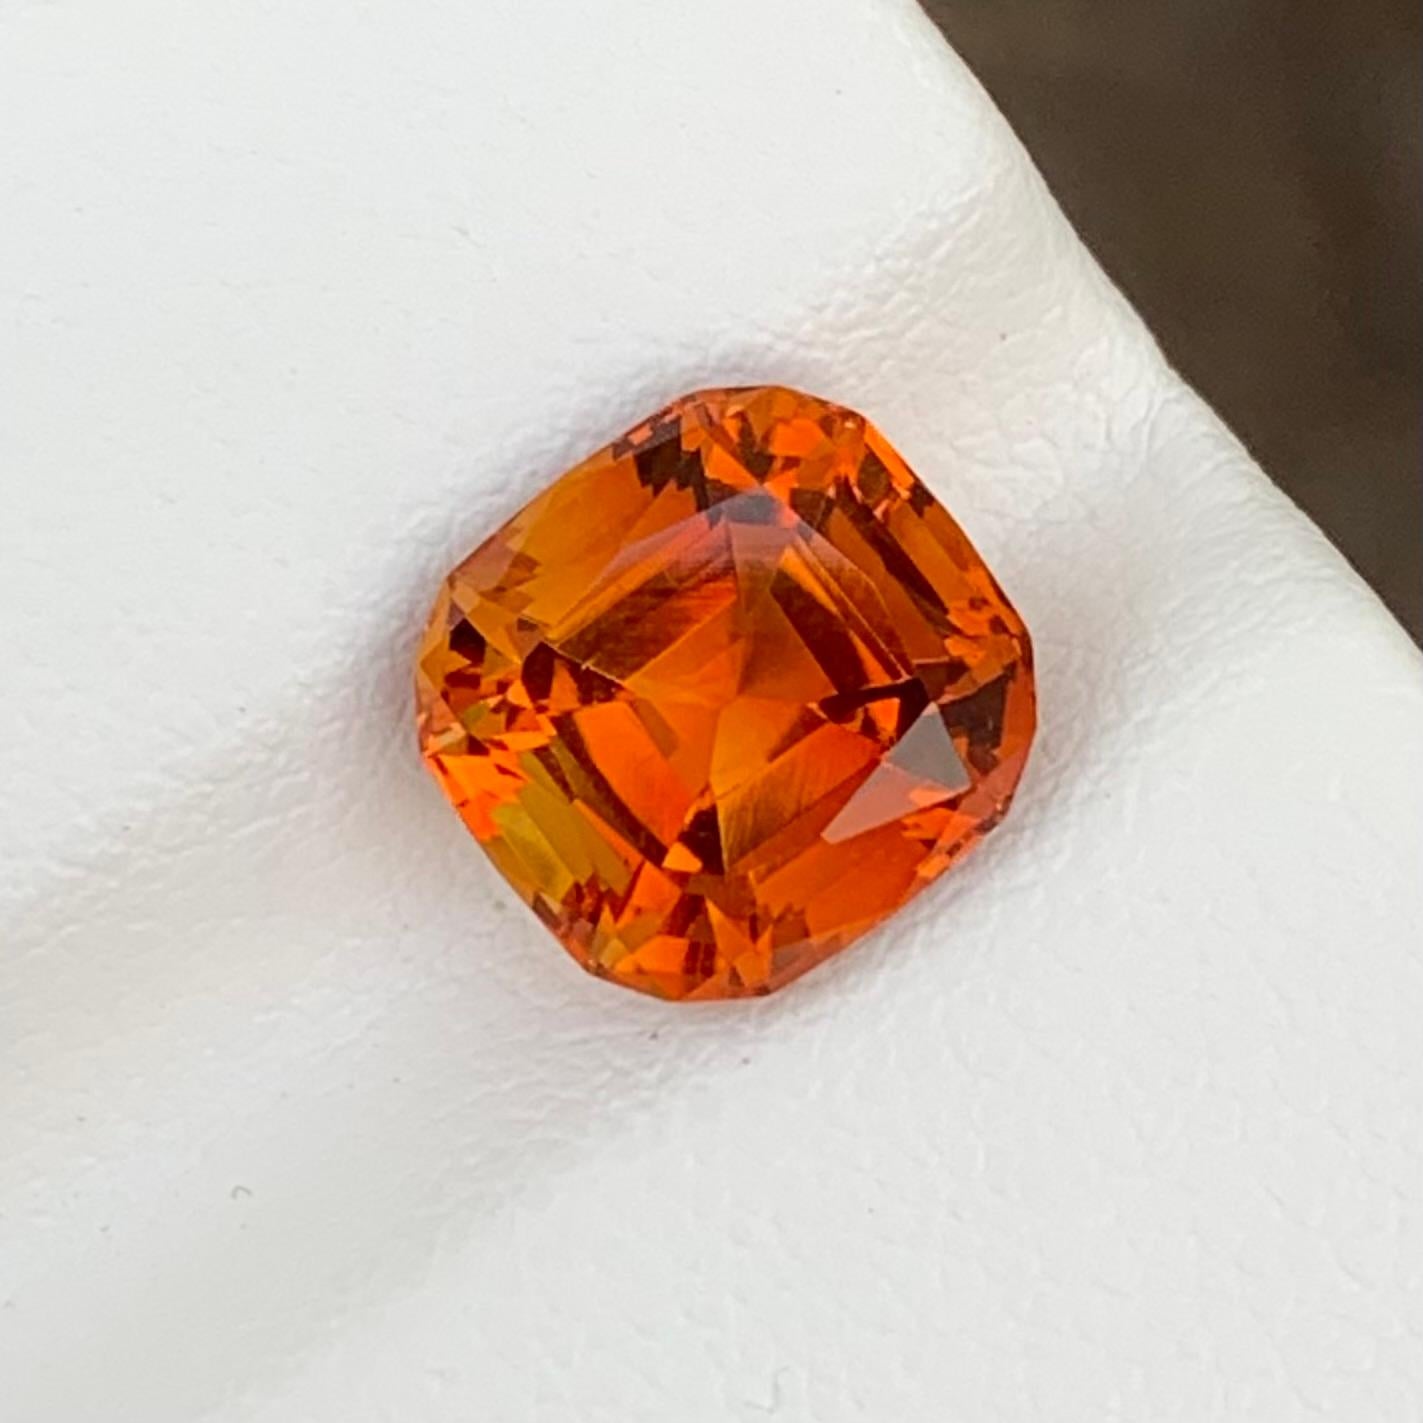 Loose Madeira Citrine 
Weight: 3.05 Carats 
Dimension: 9 x 8.6 x 6.4 Mm
Colour: Orange 
Shape: Cushion 
Certificate: On Demand 

Madeira citrine, a gemstone named after the rich and warm tones resembling the fortified wine from the Madeira region of